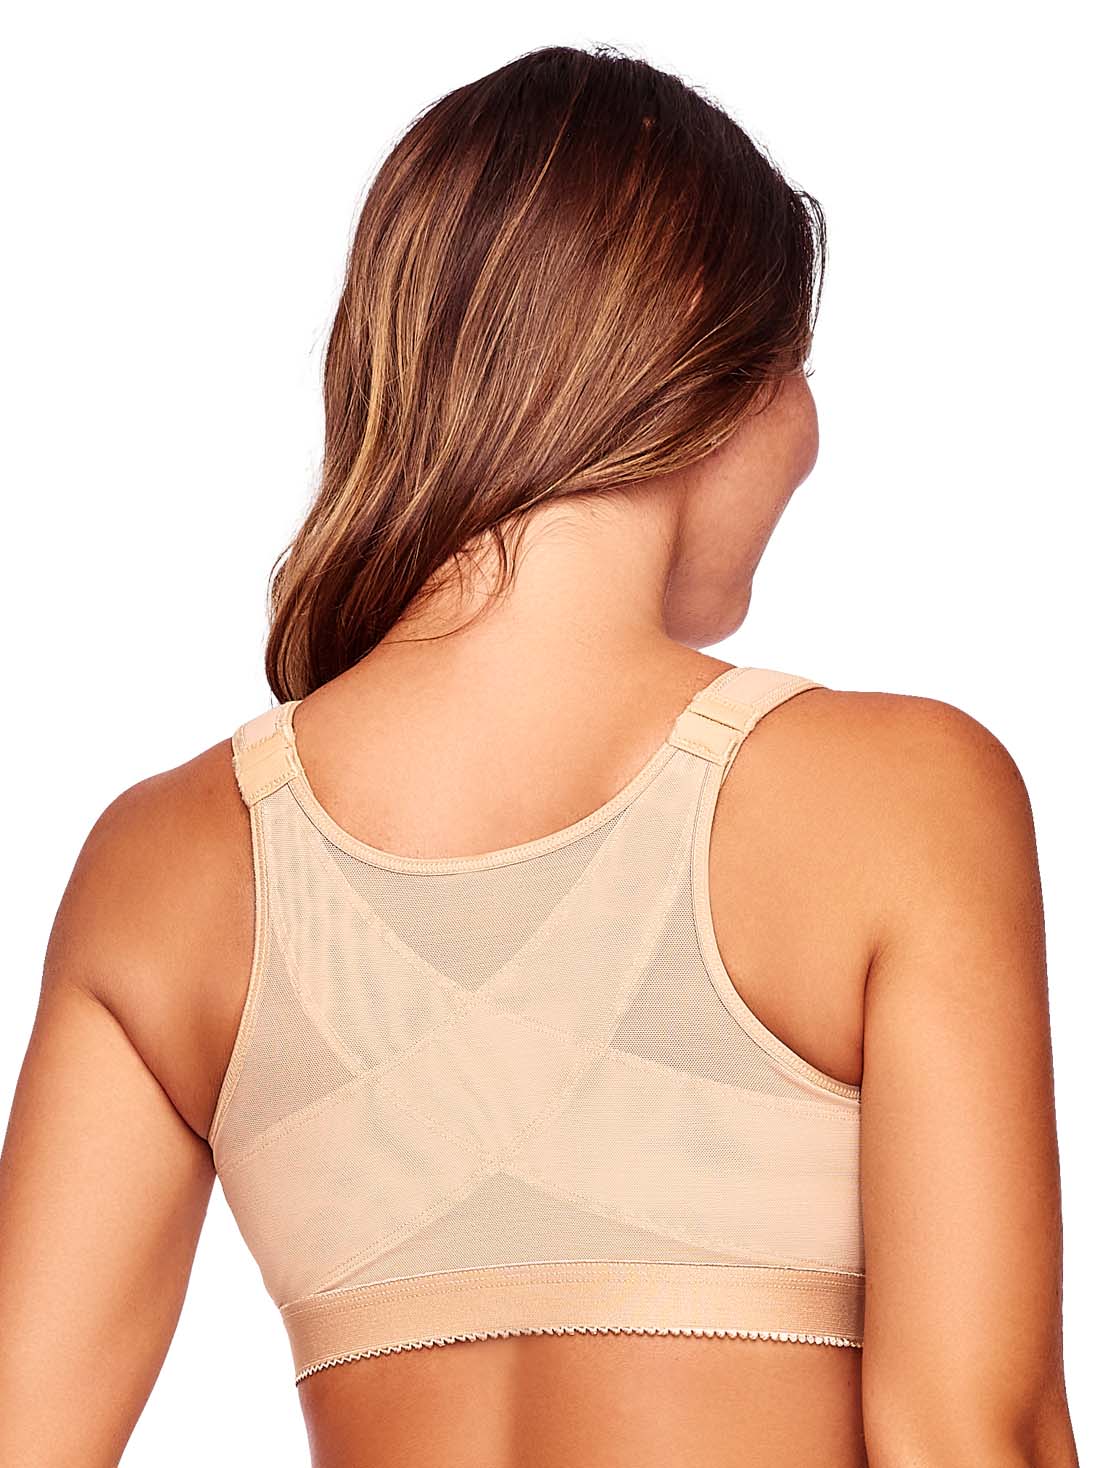 XWSM Front Closure Back Support Posture Bra Chest Pad Wirefree